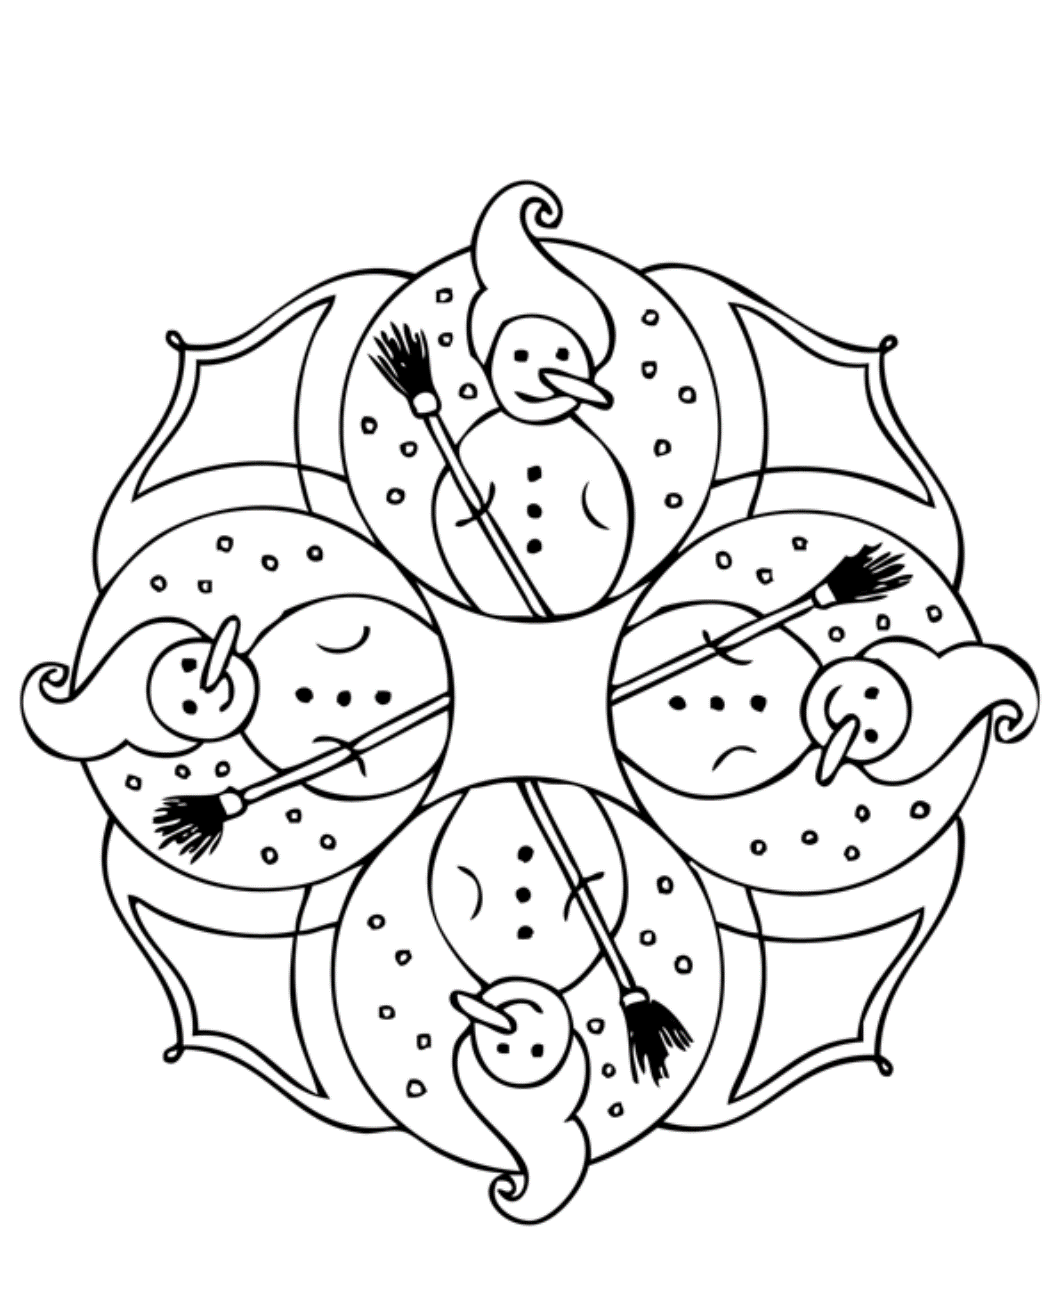 Snowman Winter Saf91 Coloring Page